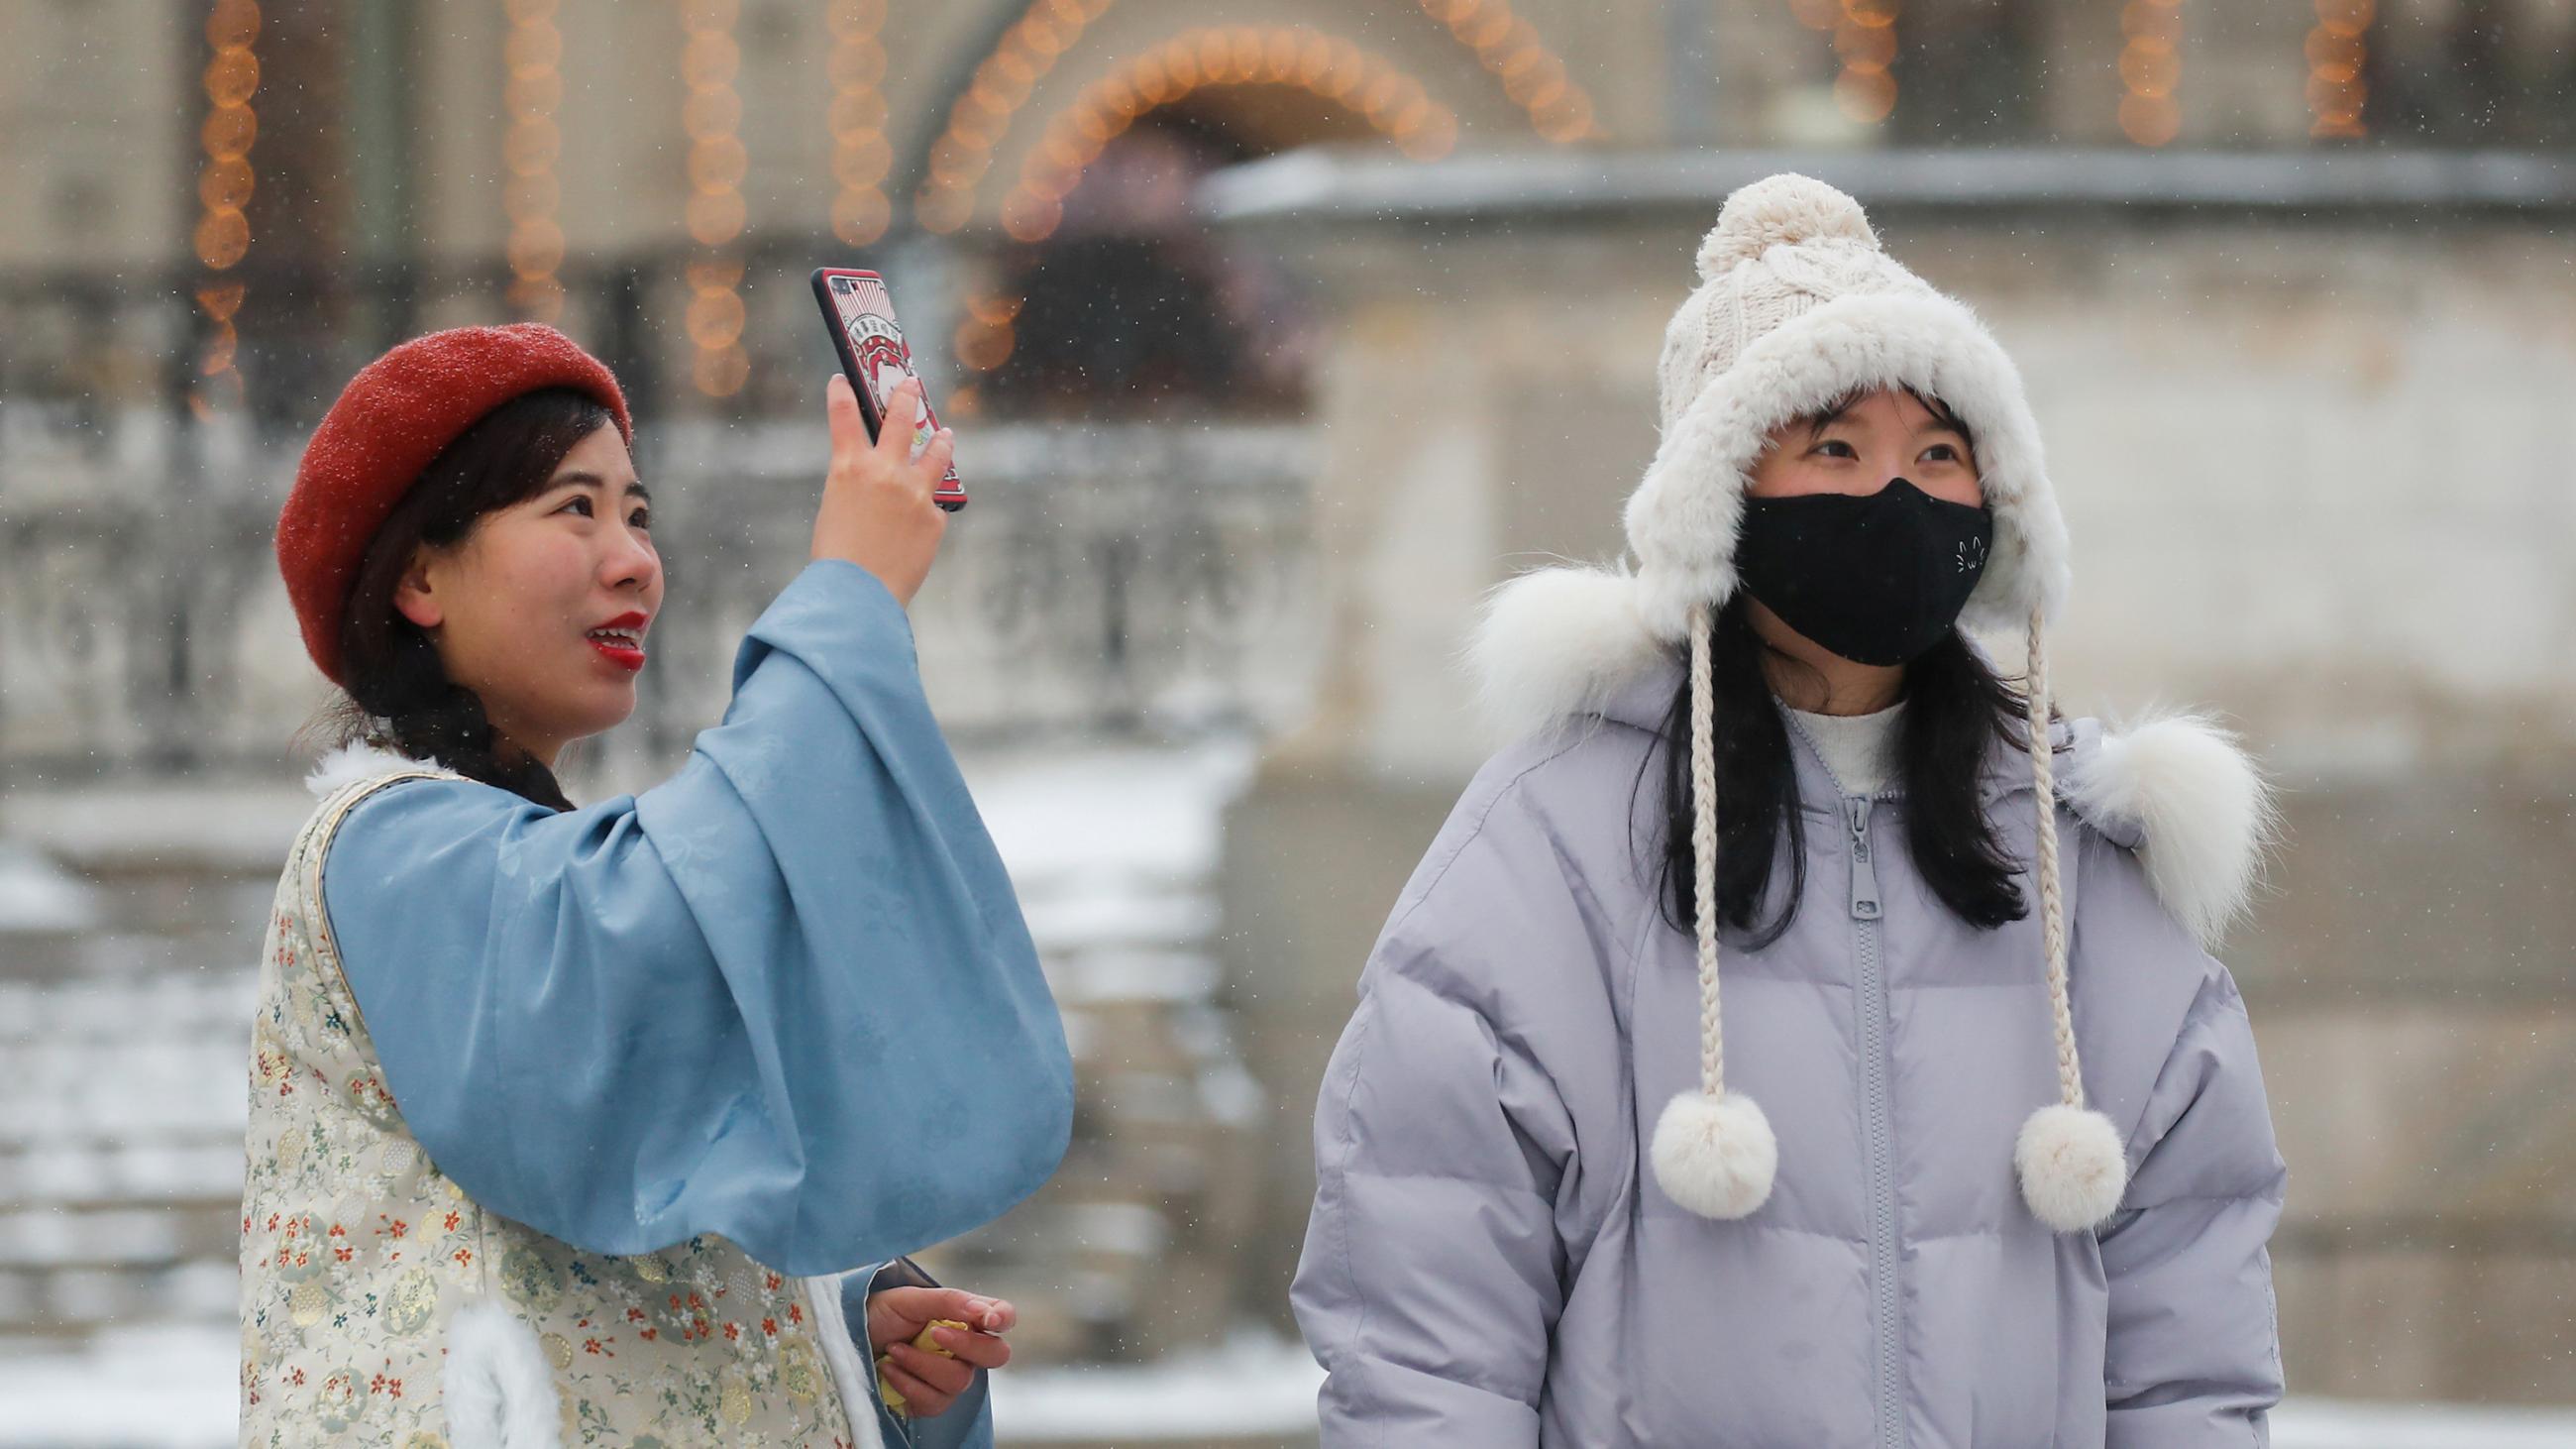  The photo shows two young women in the famed Russian tourist destimation, one of them taking a selfie as the snow softly falls around them. 